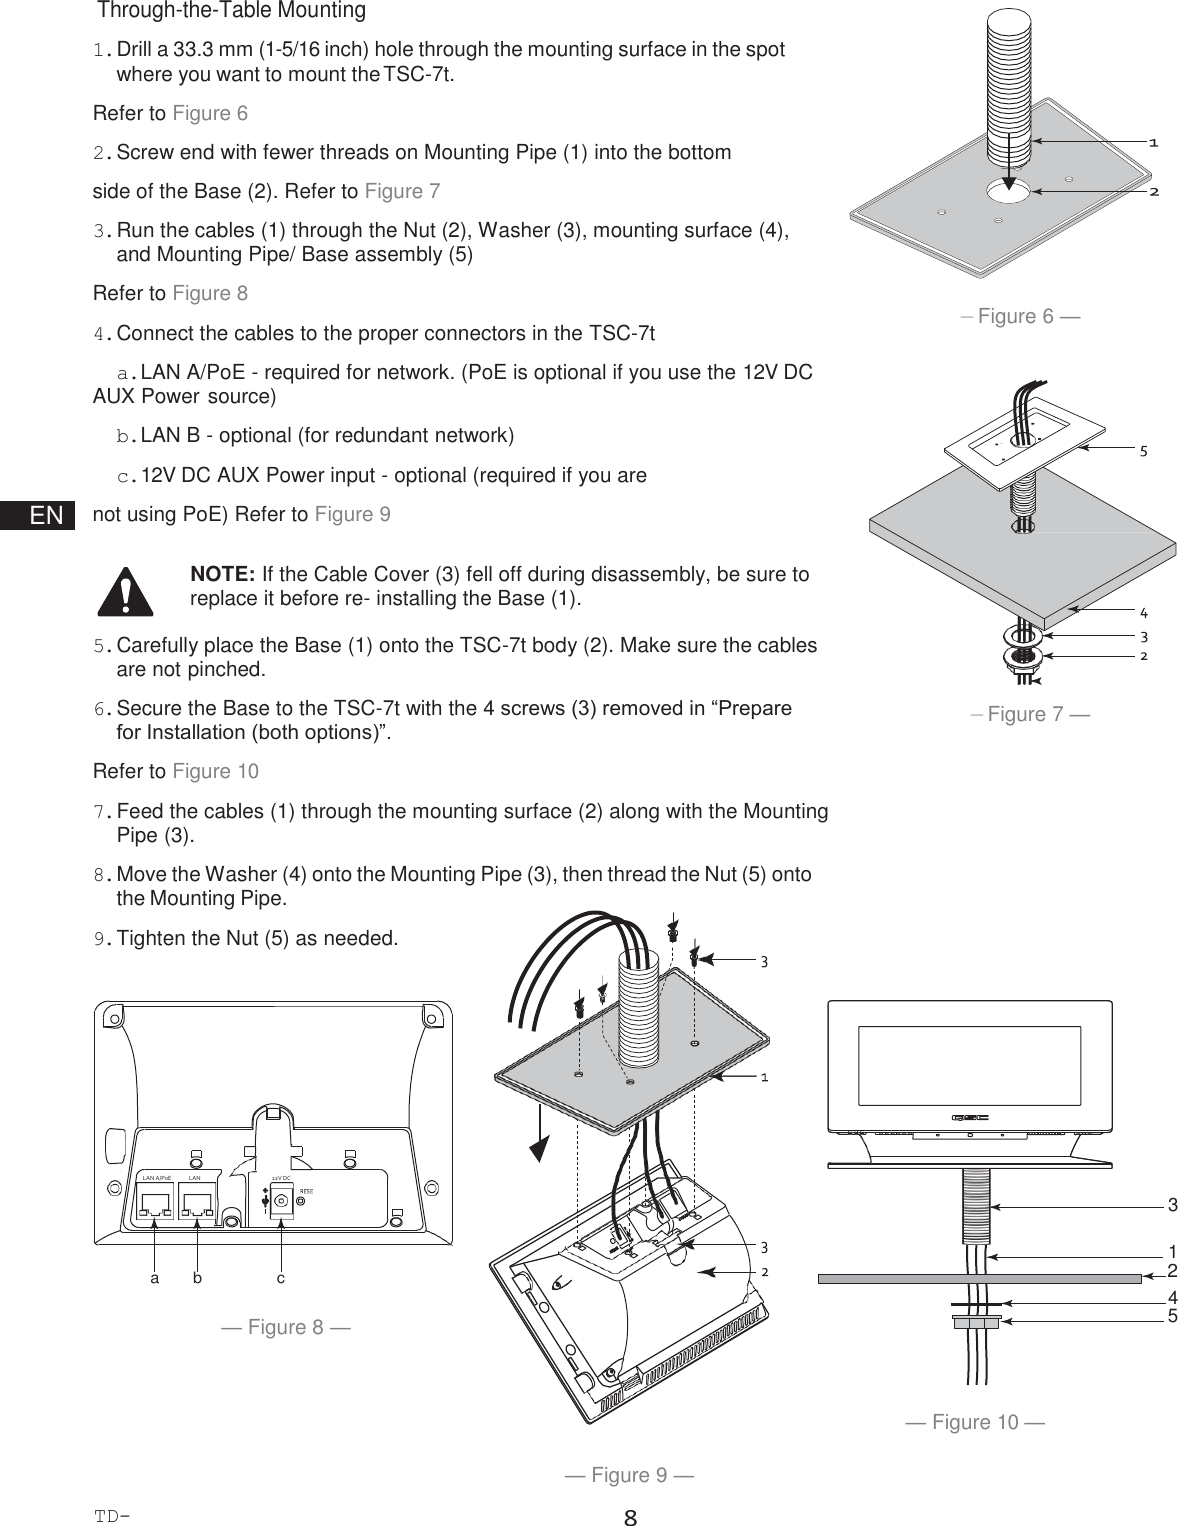 TD-000508-00-B 8              LAN A/PoE              LAN B 12V DC                           EN  Through-the-Table Mounting 1. Drill a 33.3 mm (1-5/16 inch) hole through the mounting surface in the spot where you want to mount the TSC-7t. Refer to Figure 6 2. Screw end with fewer threads on Mounting Pipe (1) into the bottom side of the Base (2). Refer to Figure 7 3. Run the cables (1) through the Nut (2), Washer (3), mounting surface (4), and Mounting Pipe/ Base assembly (5) Refer to Figure 8 4. Connect the cables to the proper connectors in the TSC-7t a. LAN A/PoE - required for network. (PoE is optional if you use the 12V DC AUX Power source) b. LAN B - optional (for redundant network) c. 12V DC AUX Power input - optional (required if you are not using PoE) Refer to Figure 9  NOTE: If the Cable Cover (3) fell off during disassembly, be sure to replace it before re- installing the Base (1).  5. Carefully place the Base (1) onto the TSC-7t body (2). Make sure the cables are not pinched. 6. Secure the Base to the TSC-7t with the 4 screws (3) removed in “Prepare for Installation (both options)”. Refer to Figure 10 7. Feed the cables (1) through the mounting surface (2) along with the Mounting Pipe (3). 8. Move the Washer (4) onto the Mounting Pipe (3), then thread the Nut (5) onto the Mounting Pipe. 9. Tighten the Nut (5) as needed.              — Figure 6 —                — Figure 7 —          3  1 a  b  c  2 4 — Figure 8 —  5 — Figure 10 —  — Figure 9 — 